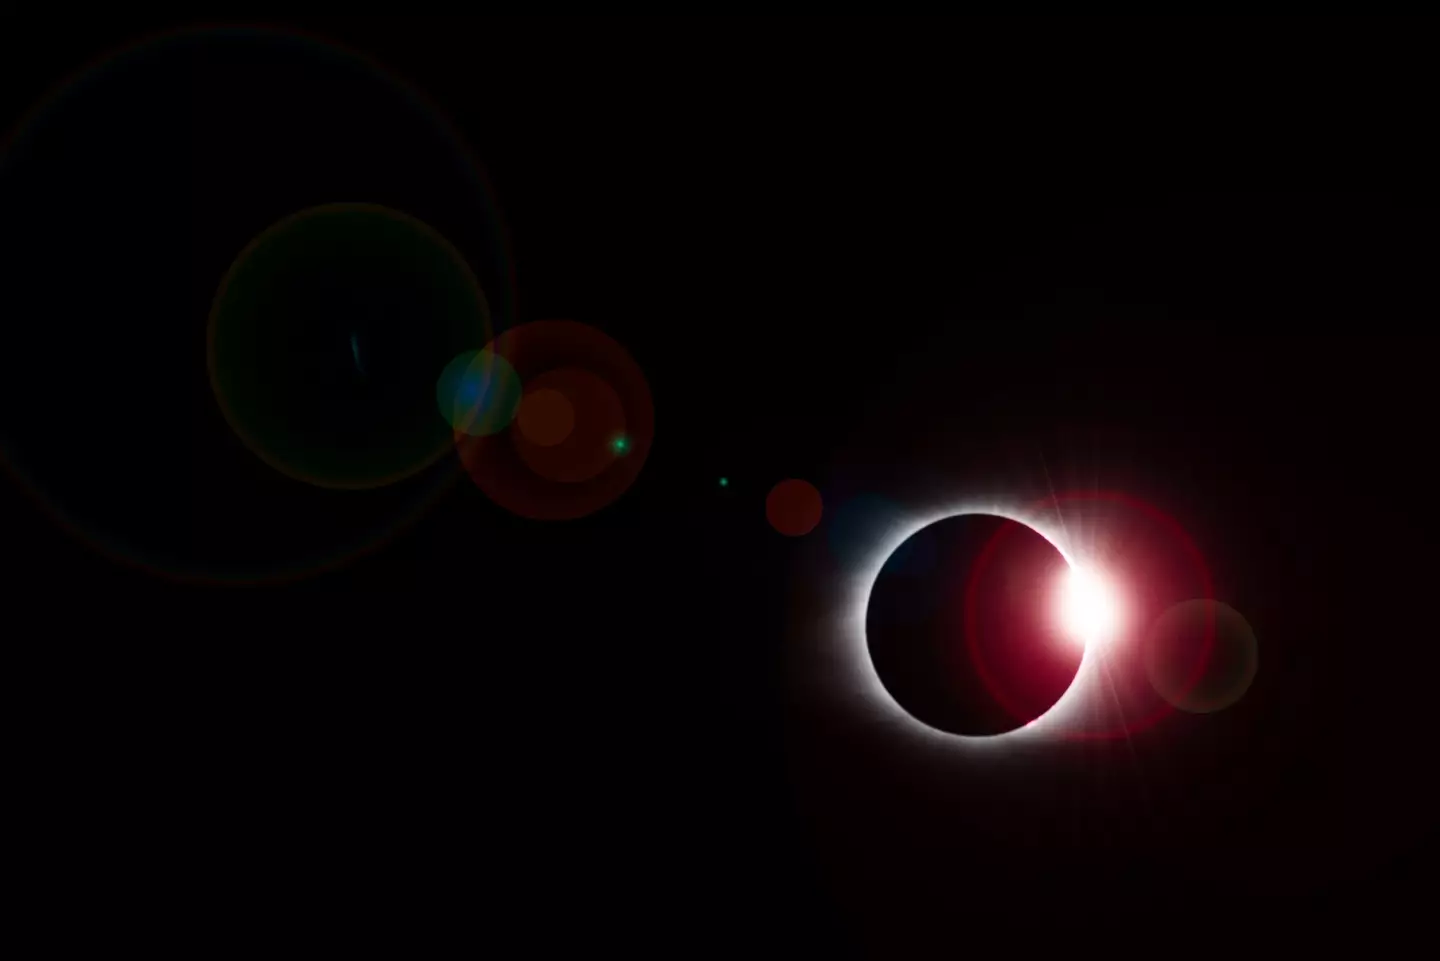 A total eclipse takes place every 18 months or so. Dalton Hamm / Getty Images